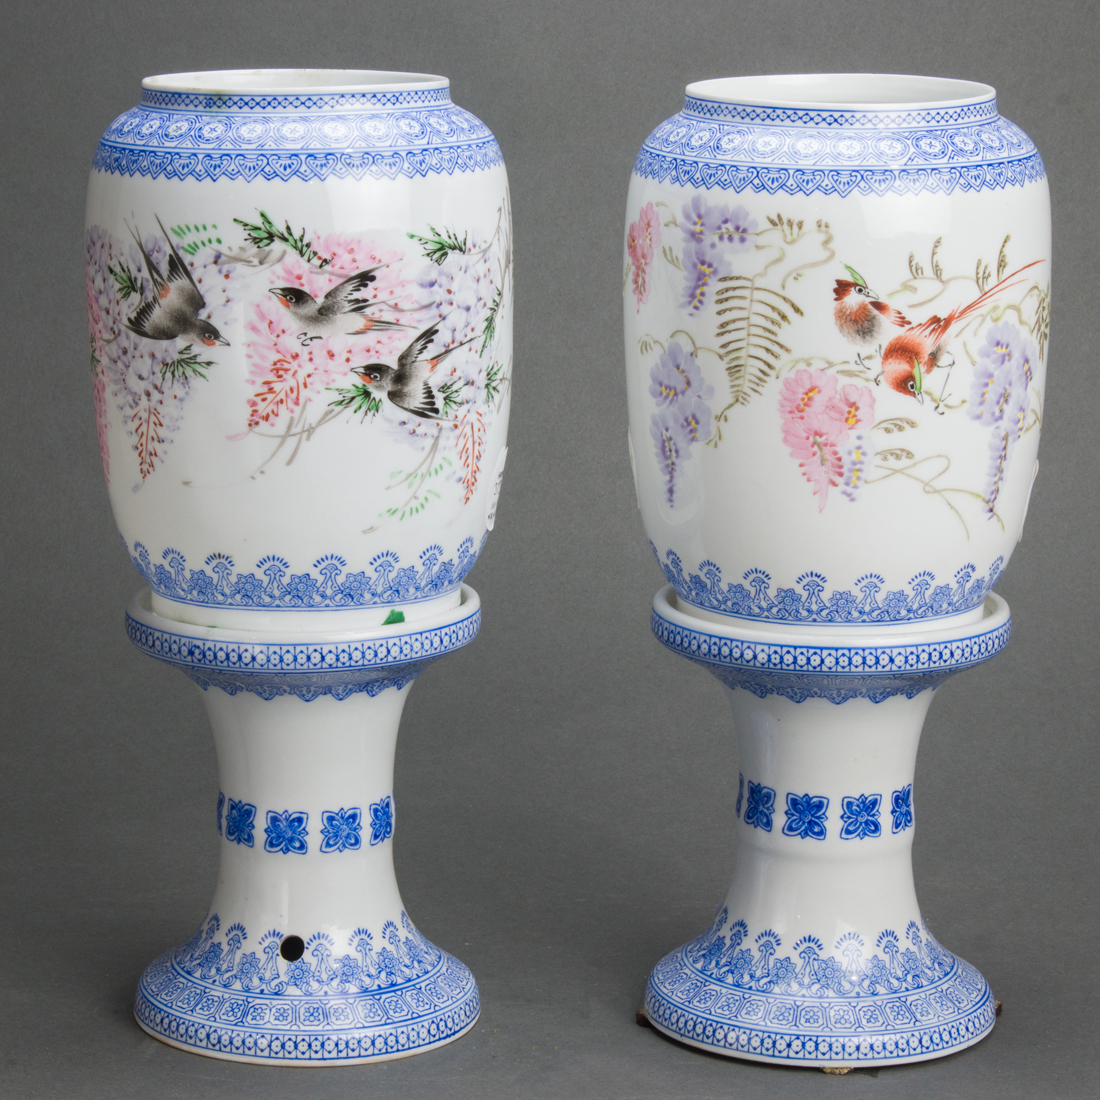 (LOT OF 2) CHINESE FAMILLE ROSE